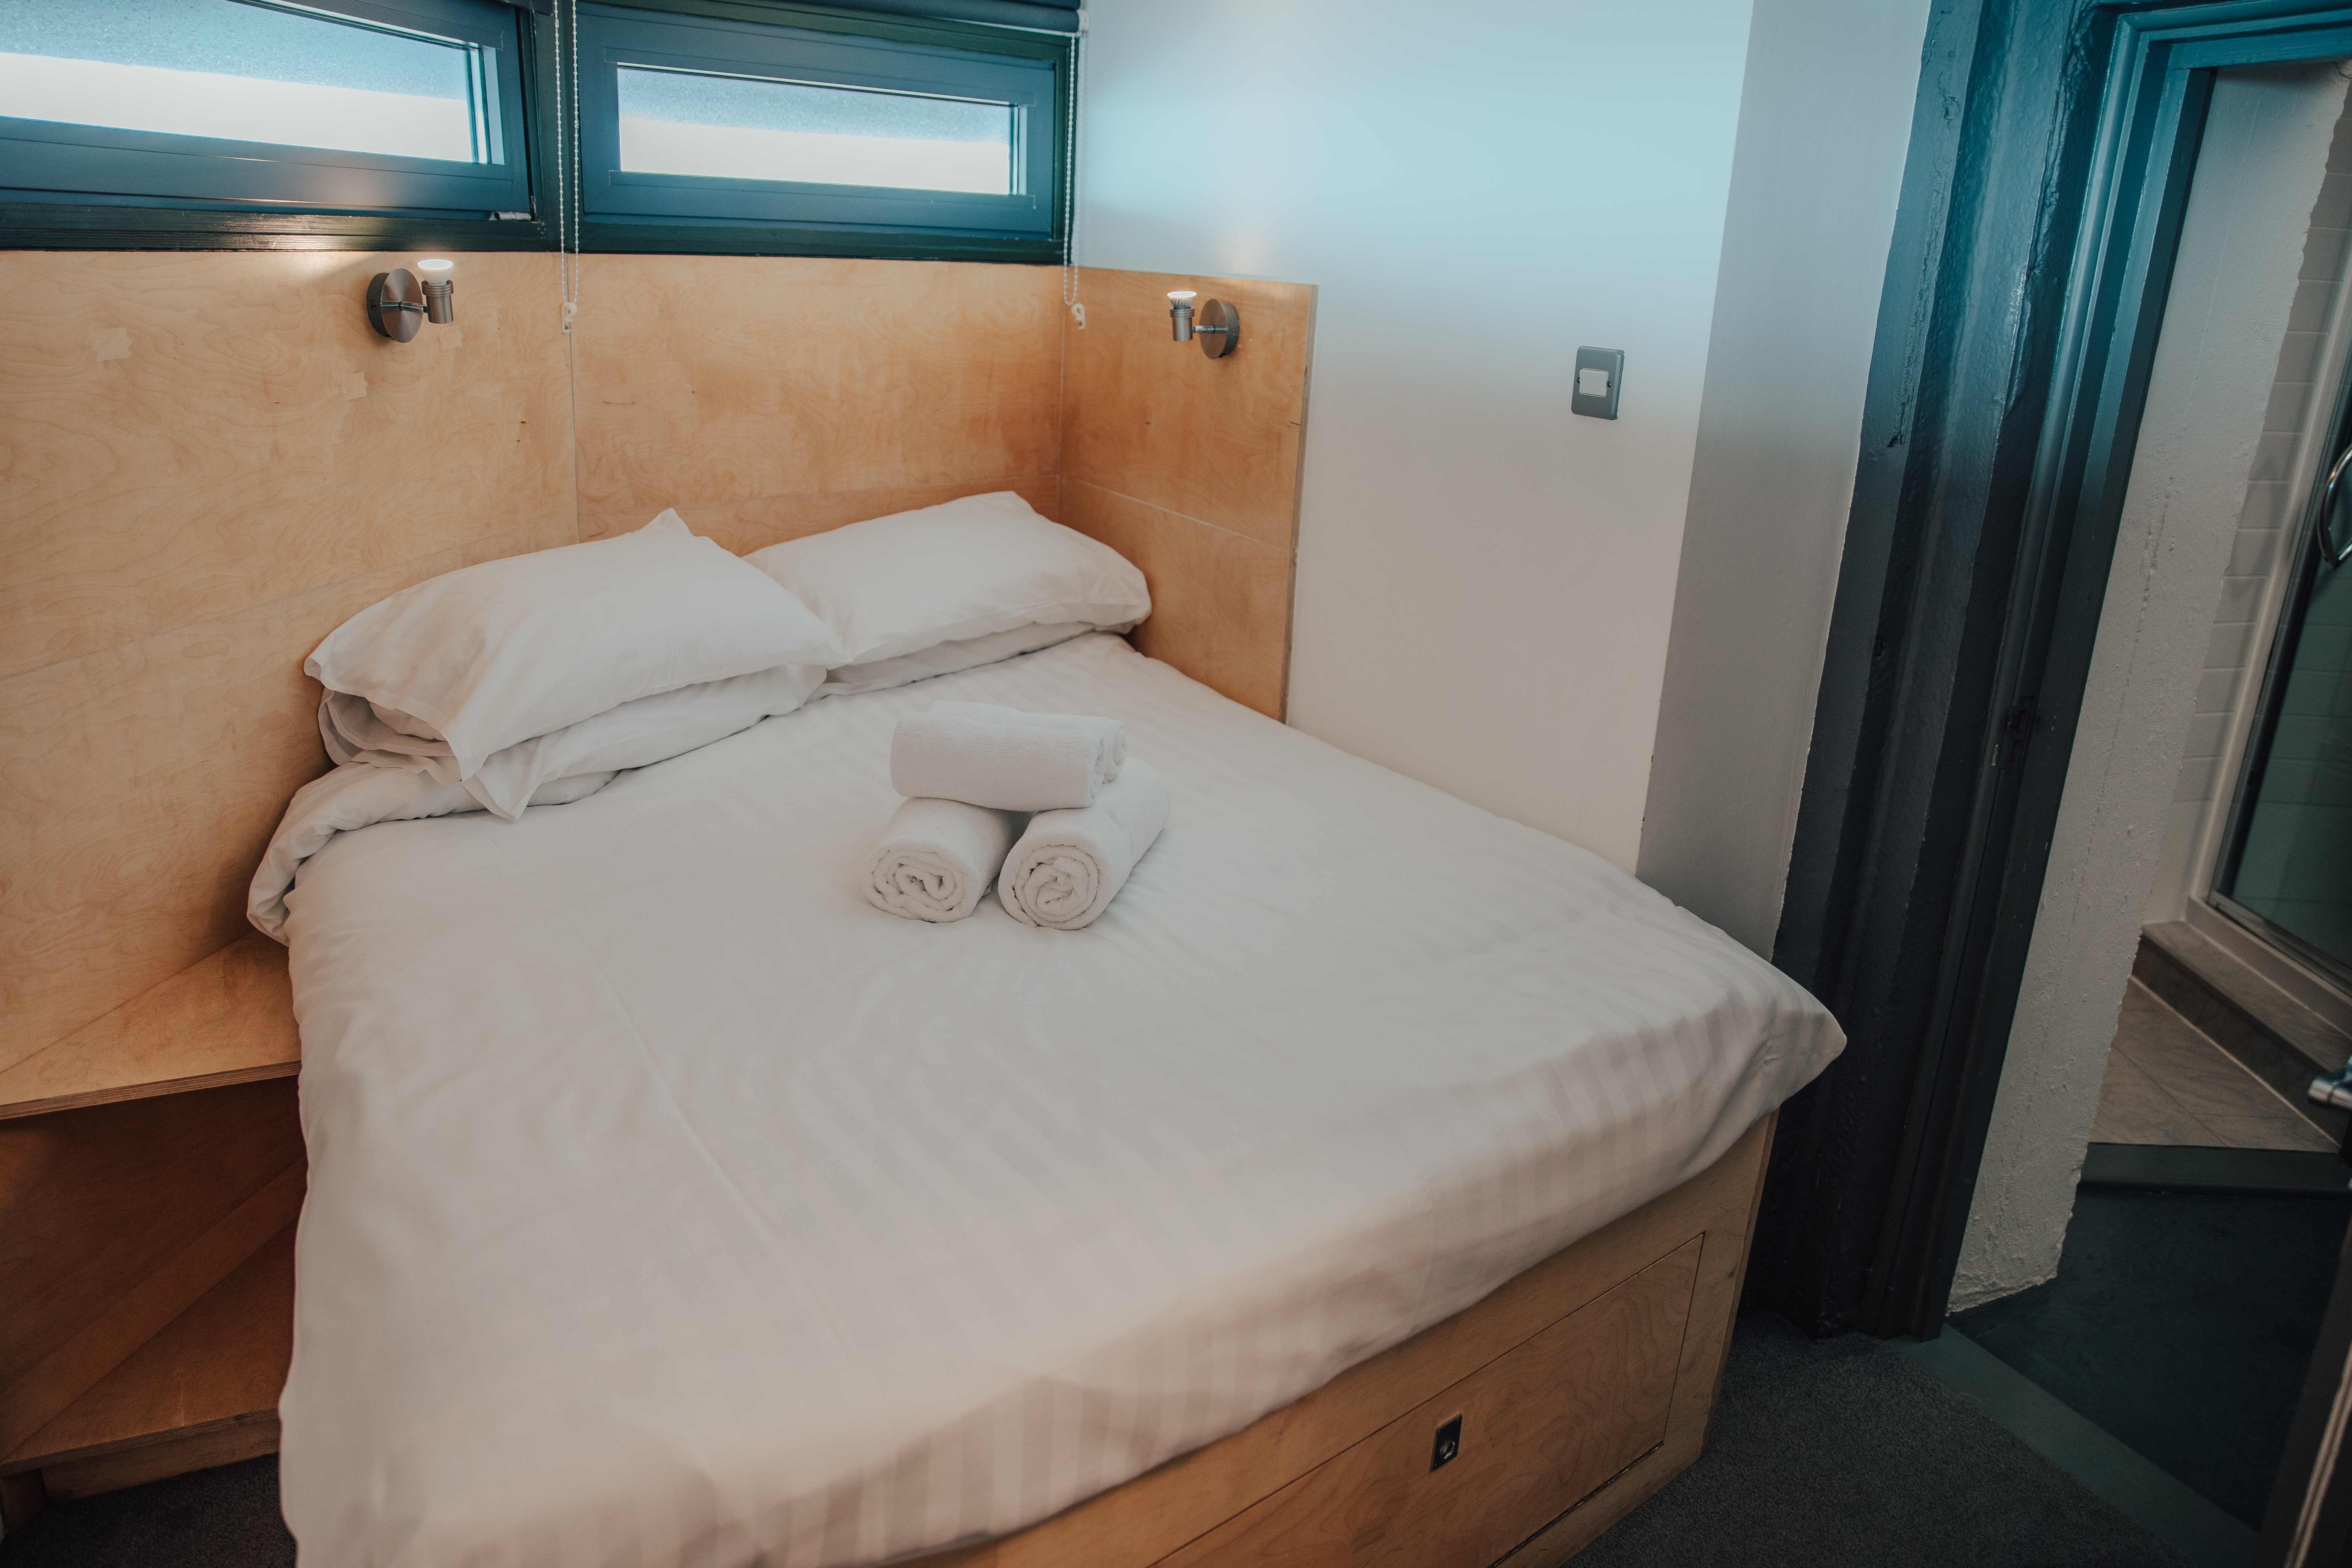 The Radio Tower has 3 identical double bedrooms, all with fitted wardrobes, hand-made beds and their own adjacent shower room with shower, basin and toilet.